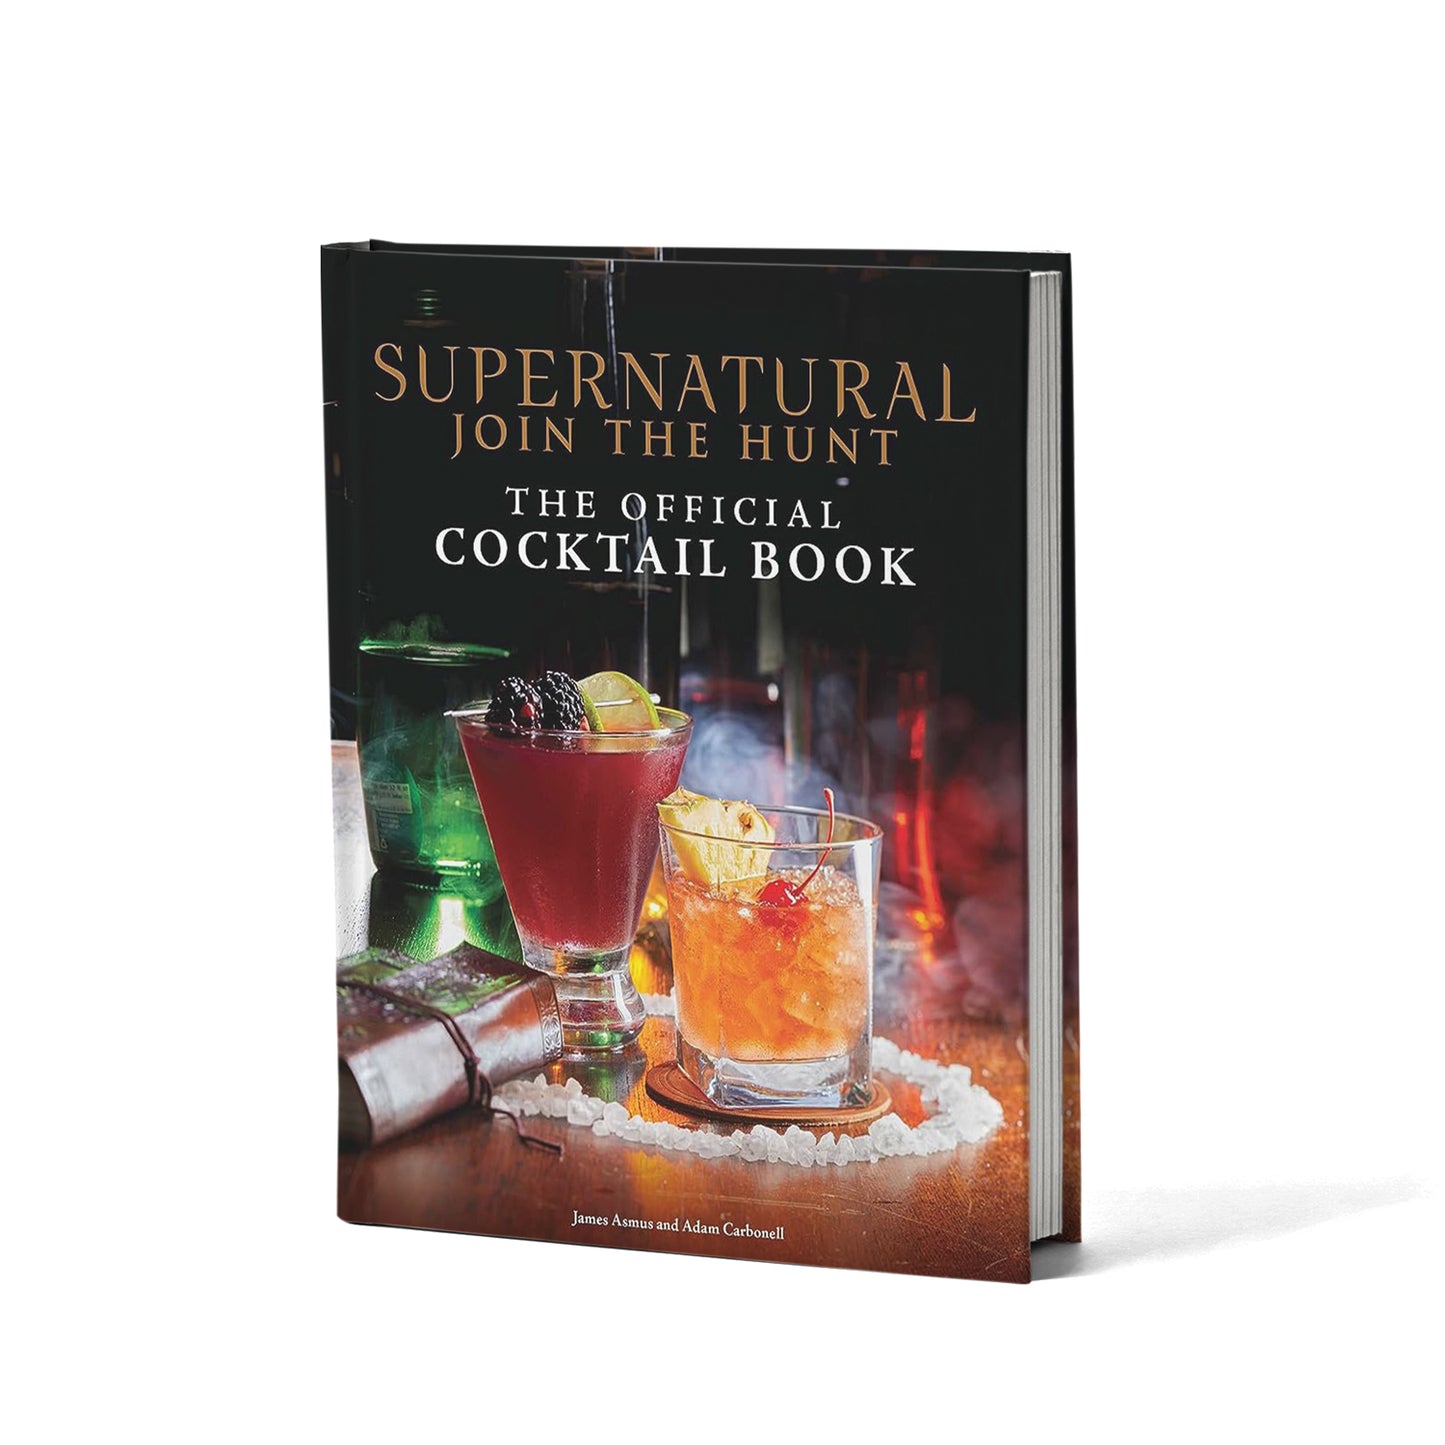 A picture of various cocktails on a tabletop, sitting in a circle of salt crystals. At the top is gold text reading "Supernatural, Join the hunt." Below that in white text is "The official Cocktail Book."